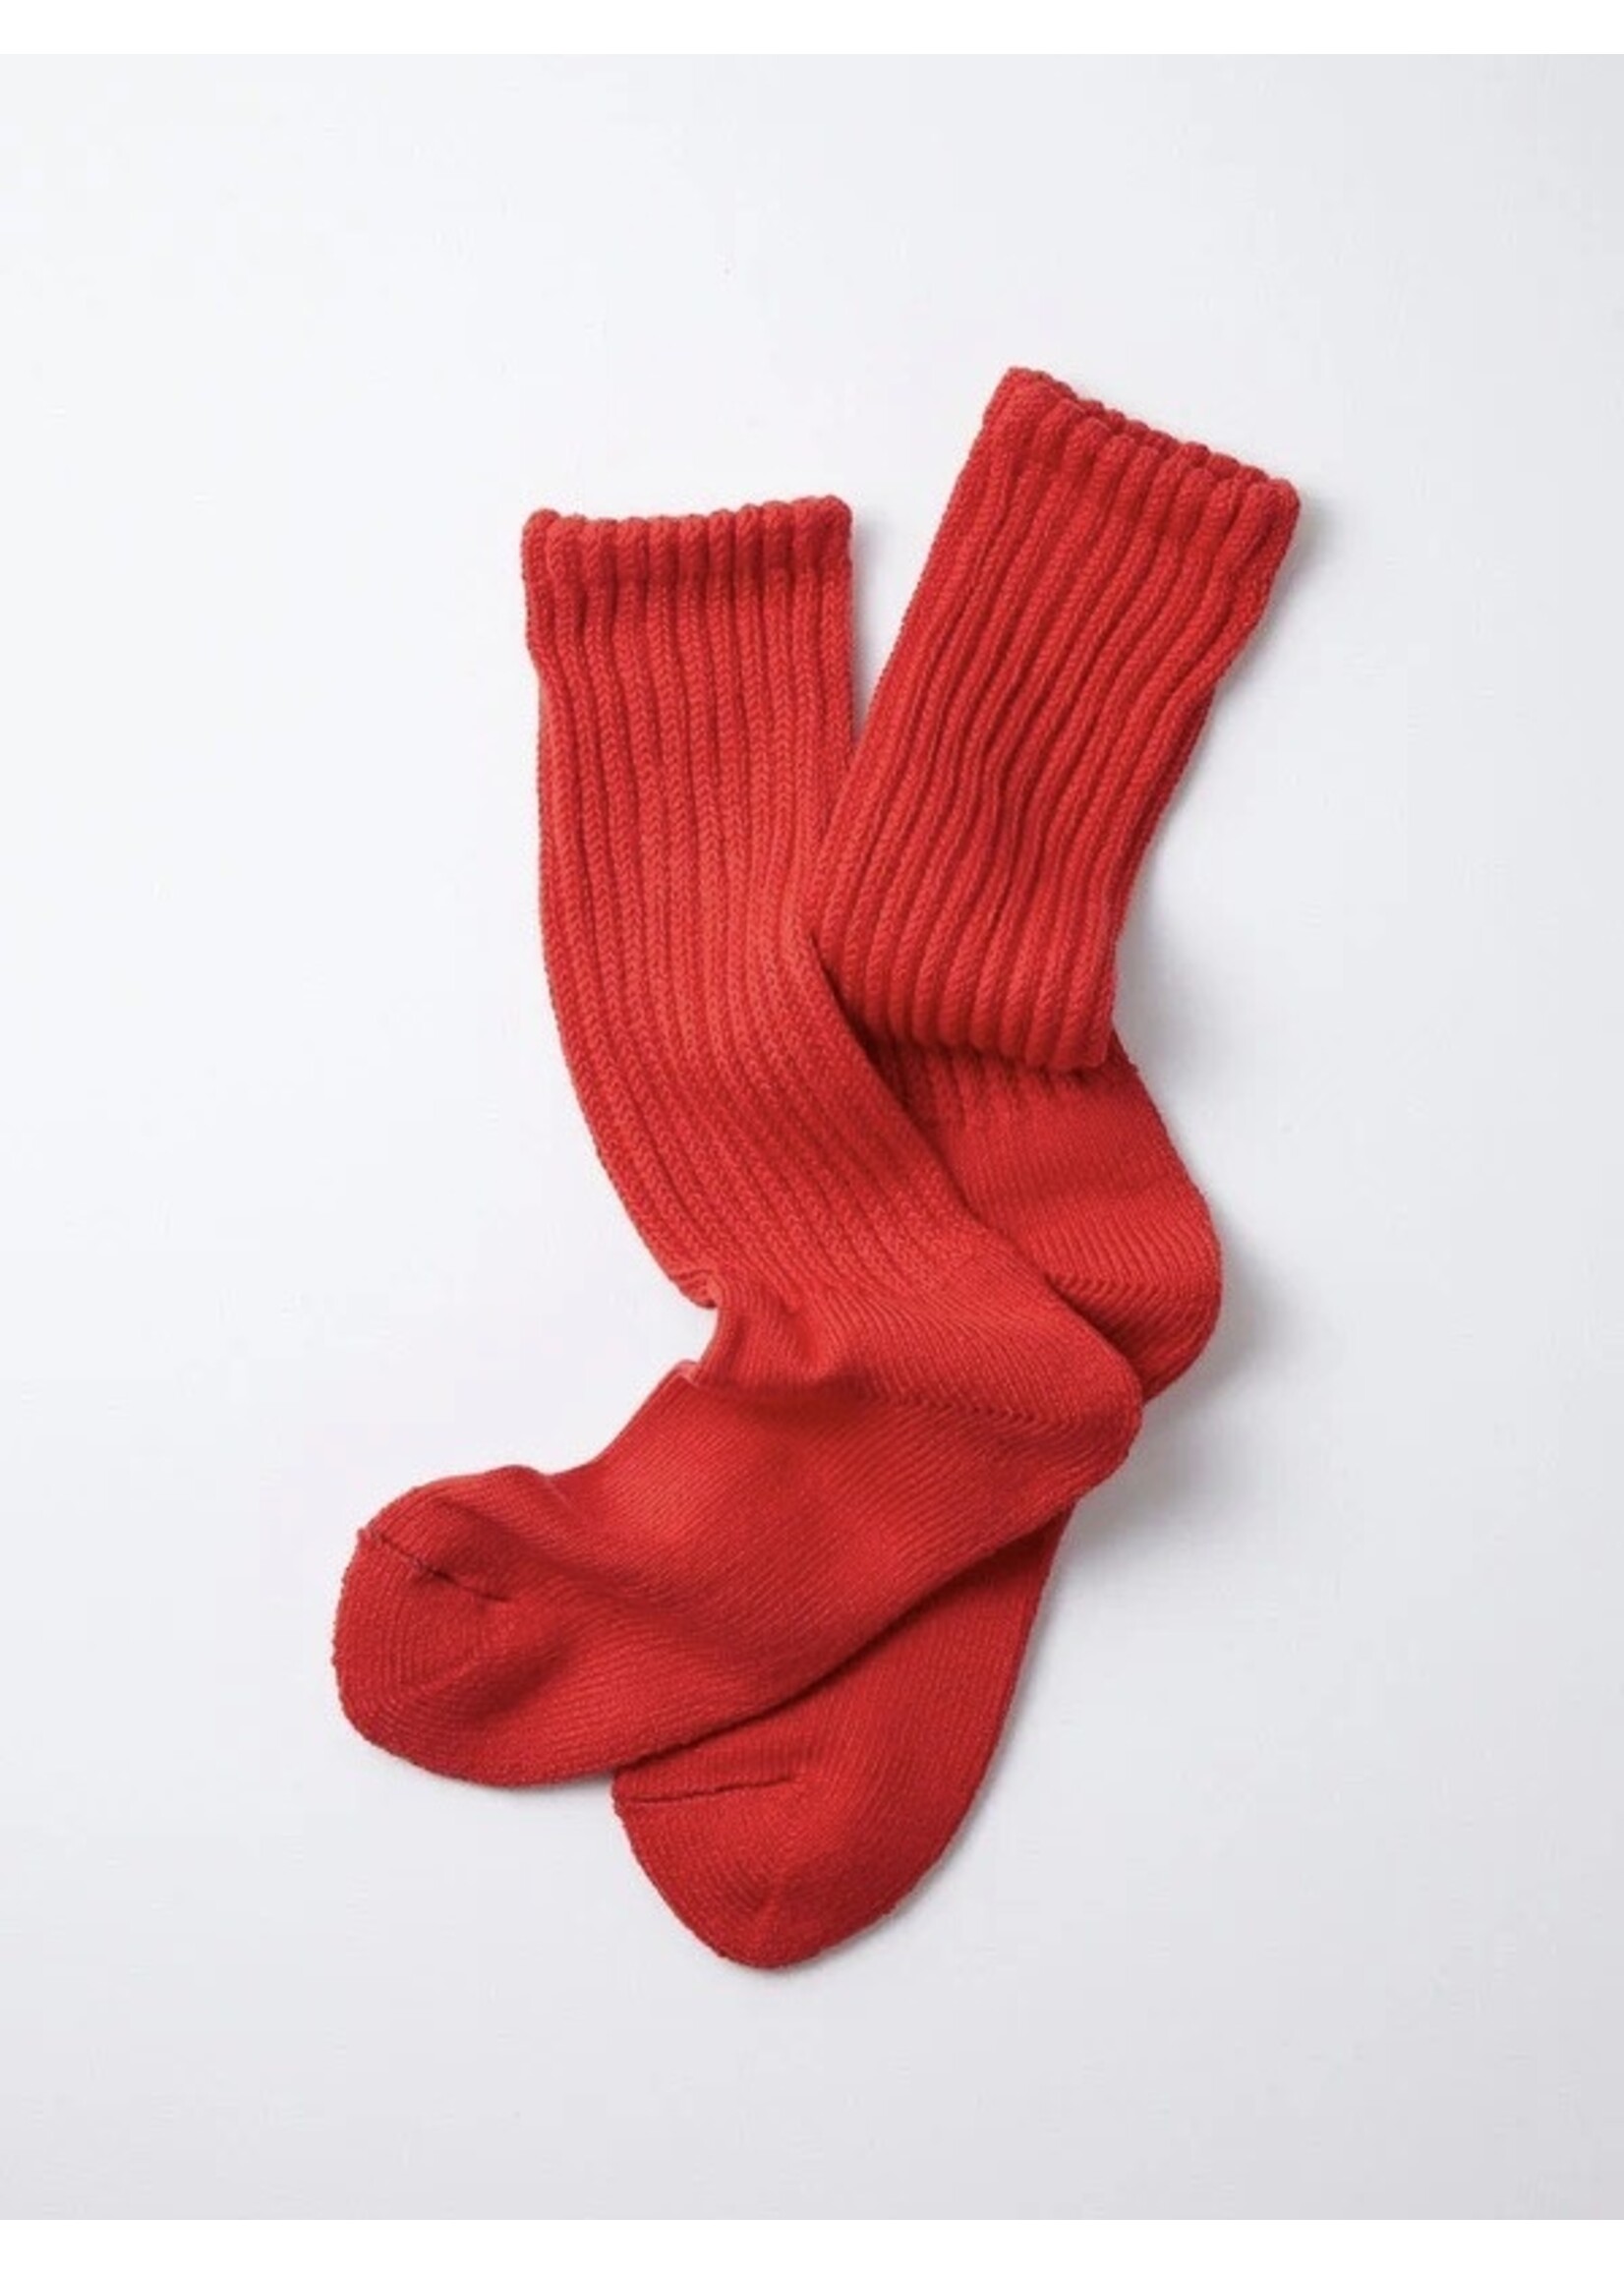 Loose Pile Crew Socks by ROTOTO